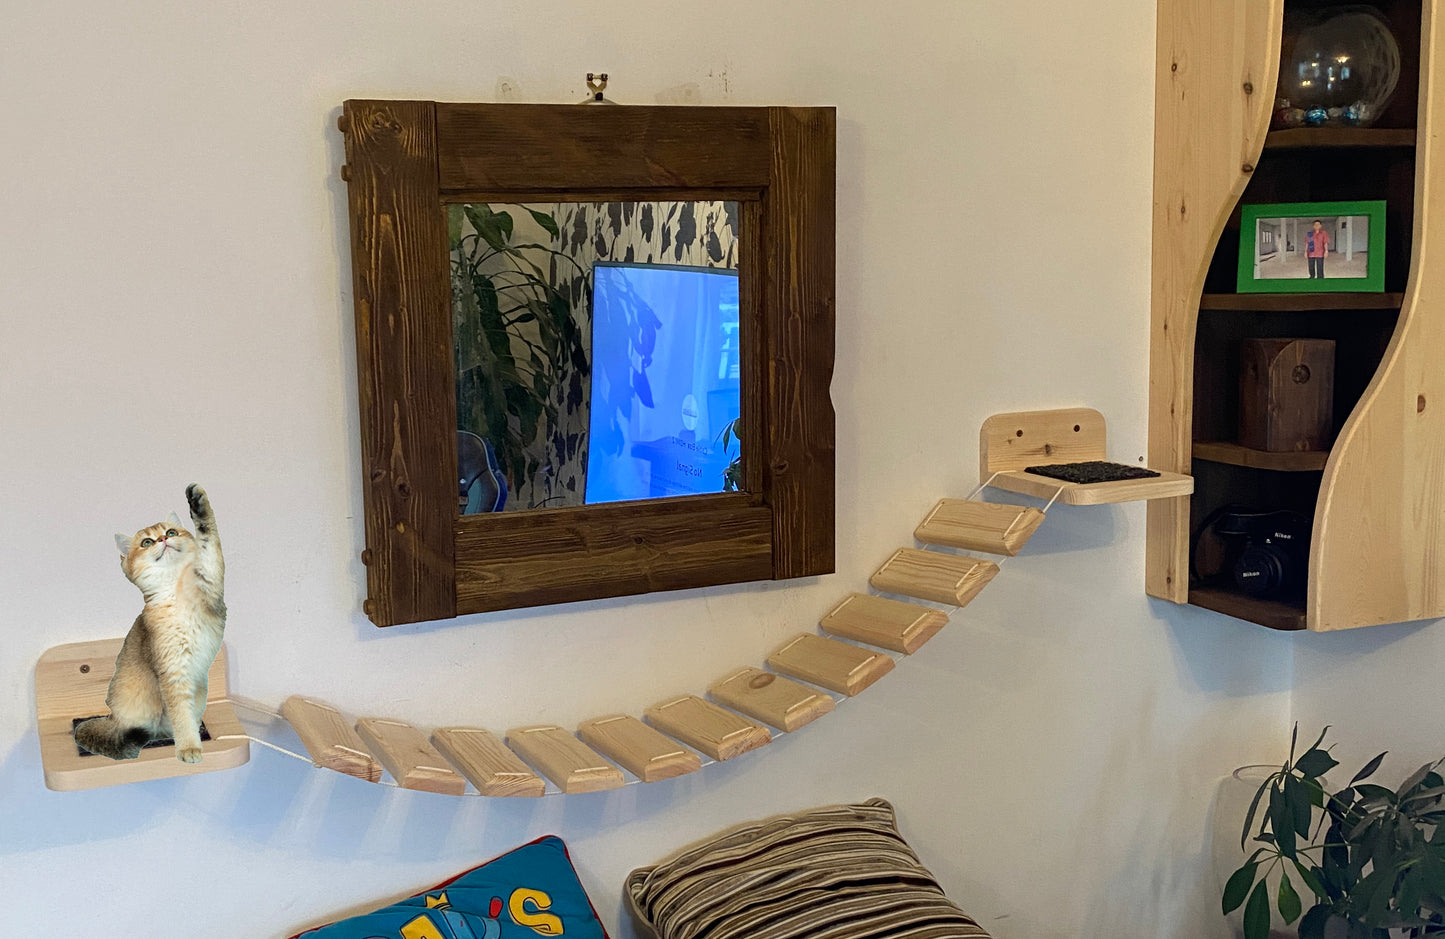 Cat Wall Bridge, Catio style in solid wood